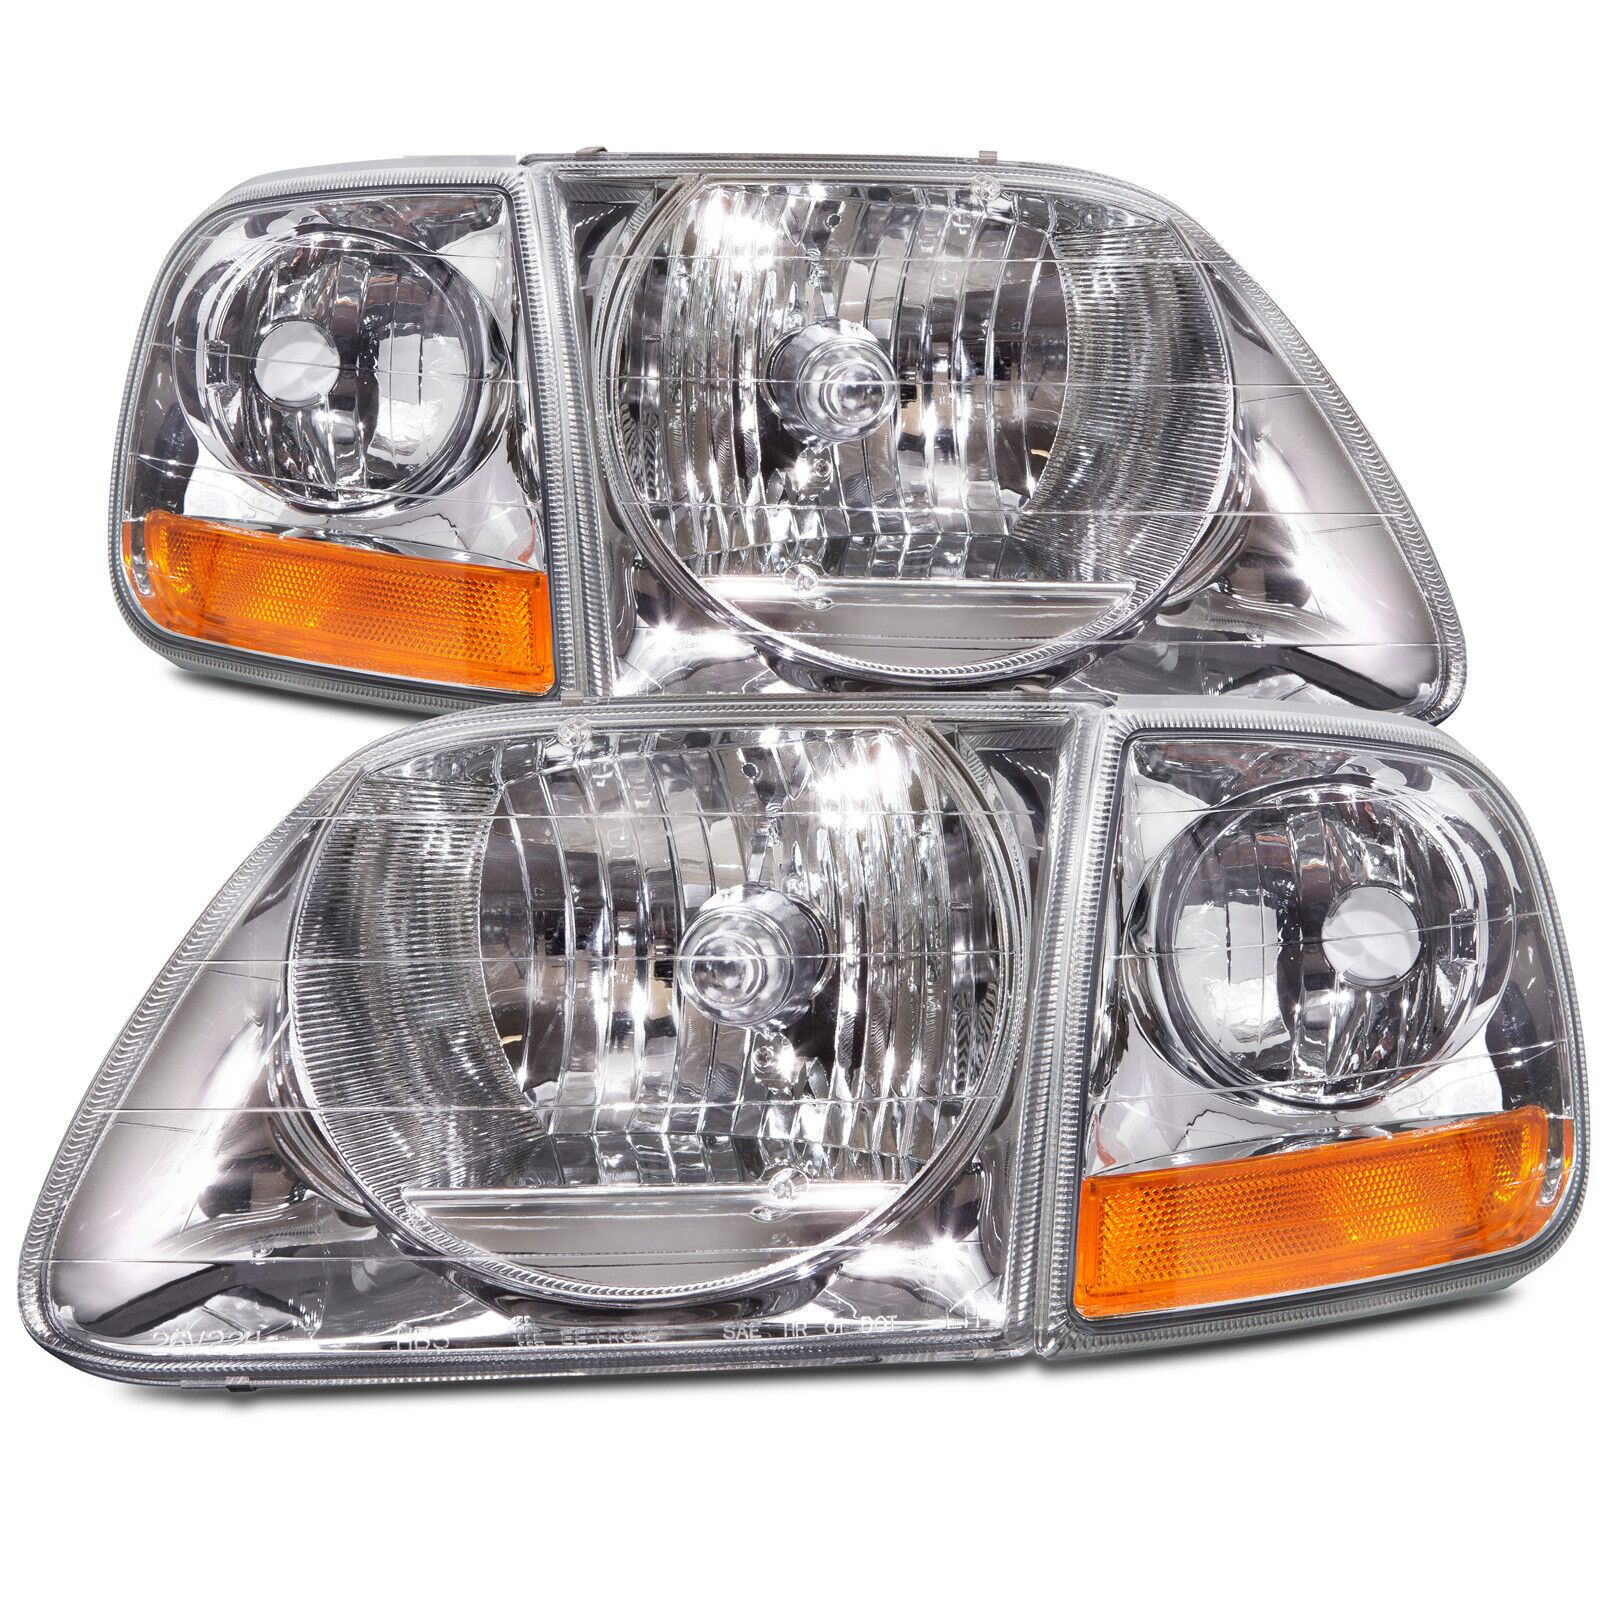 Lightning Style Headlights Headlamps 4Pc Set Fits 97-02 Ford F150/Expedition